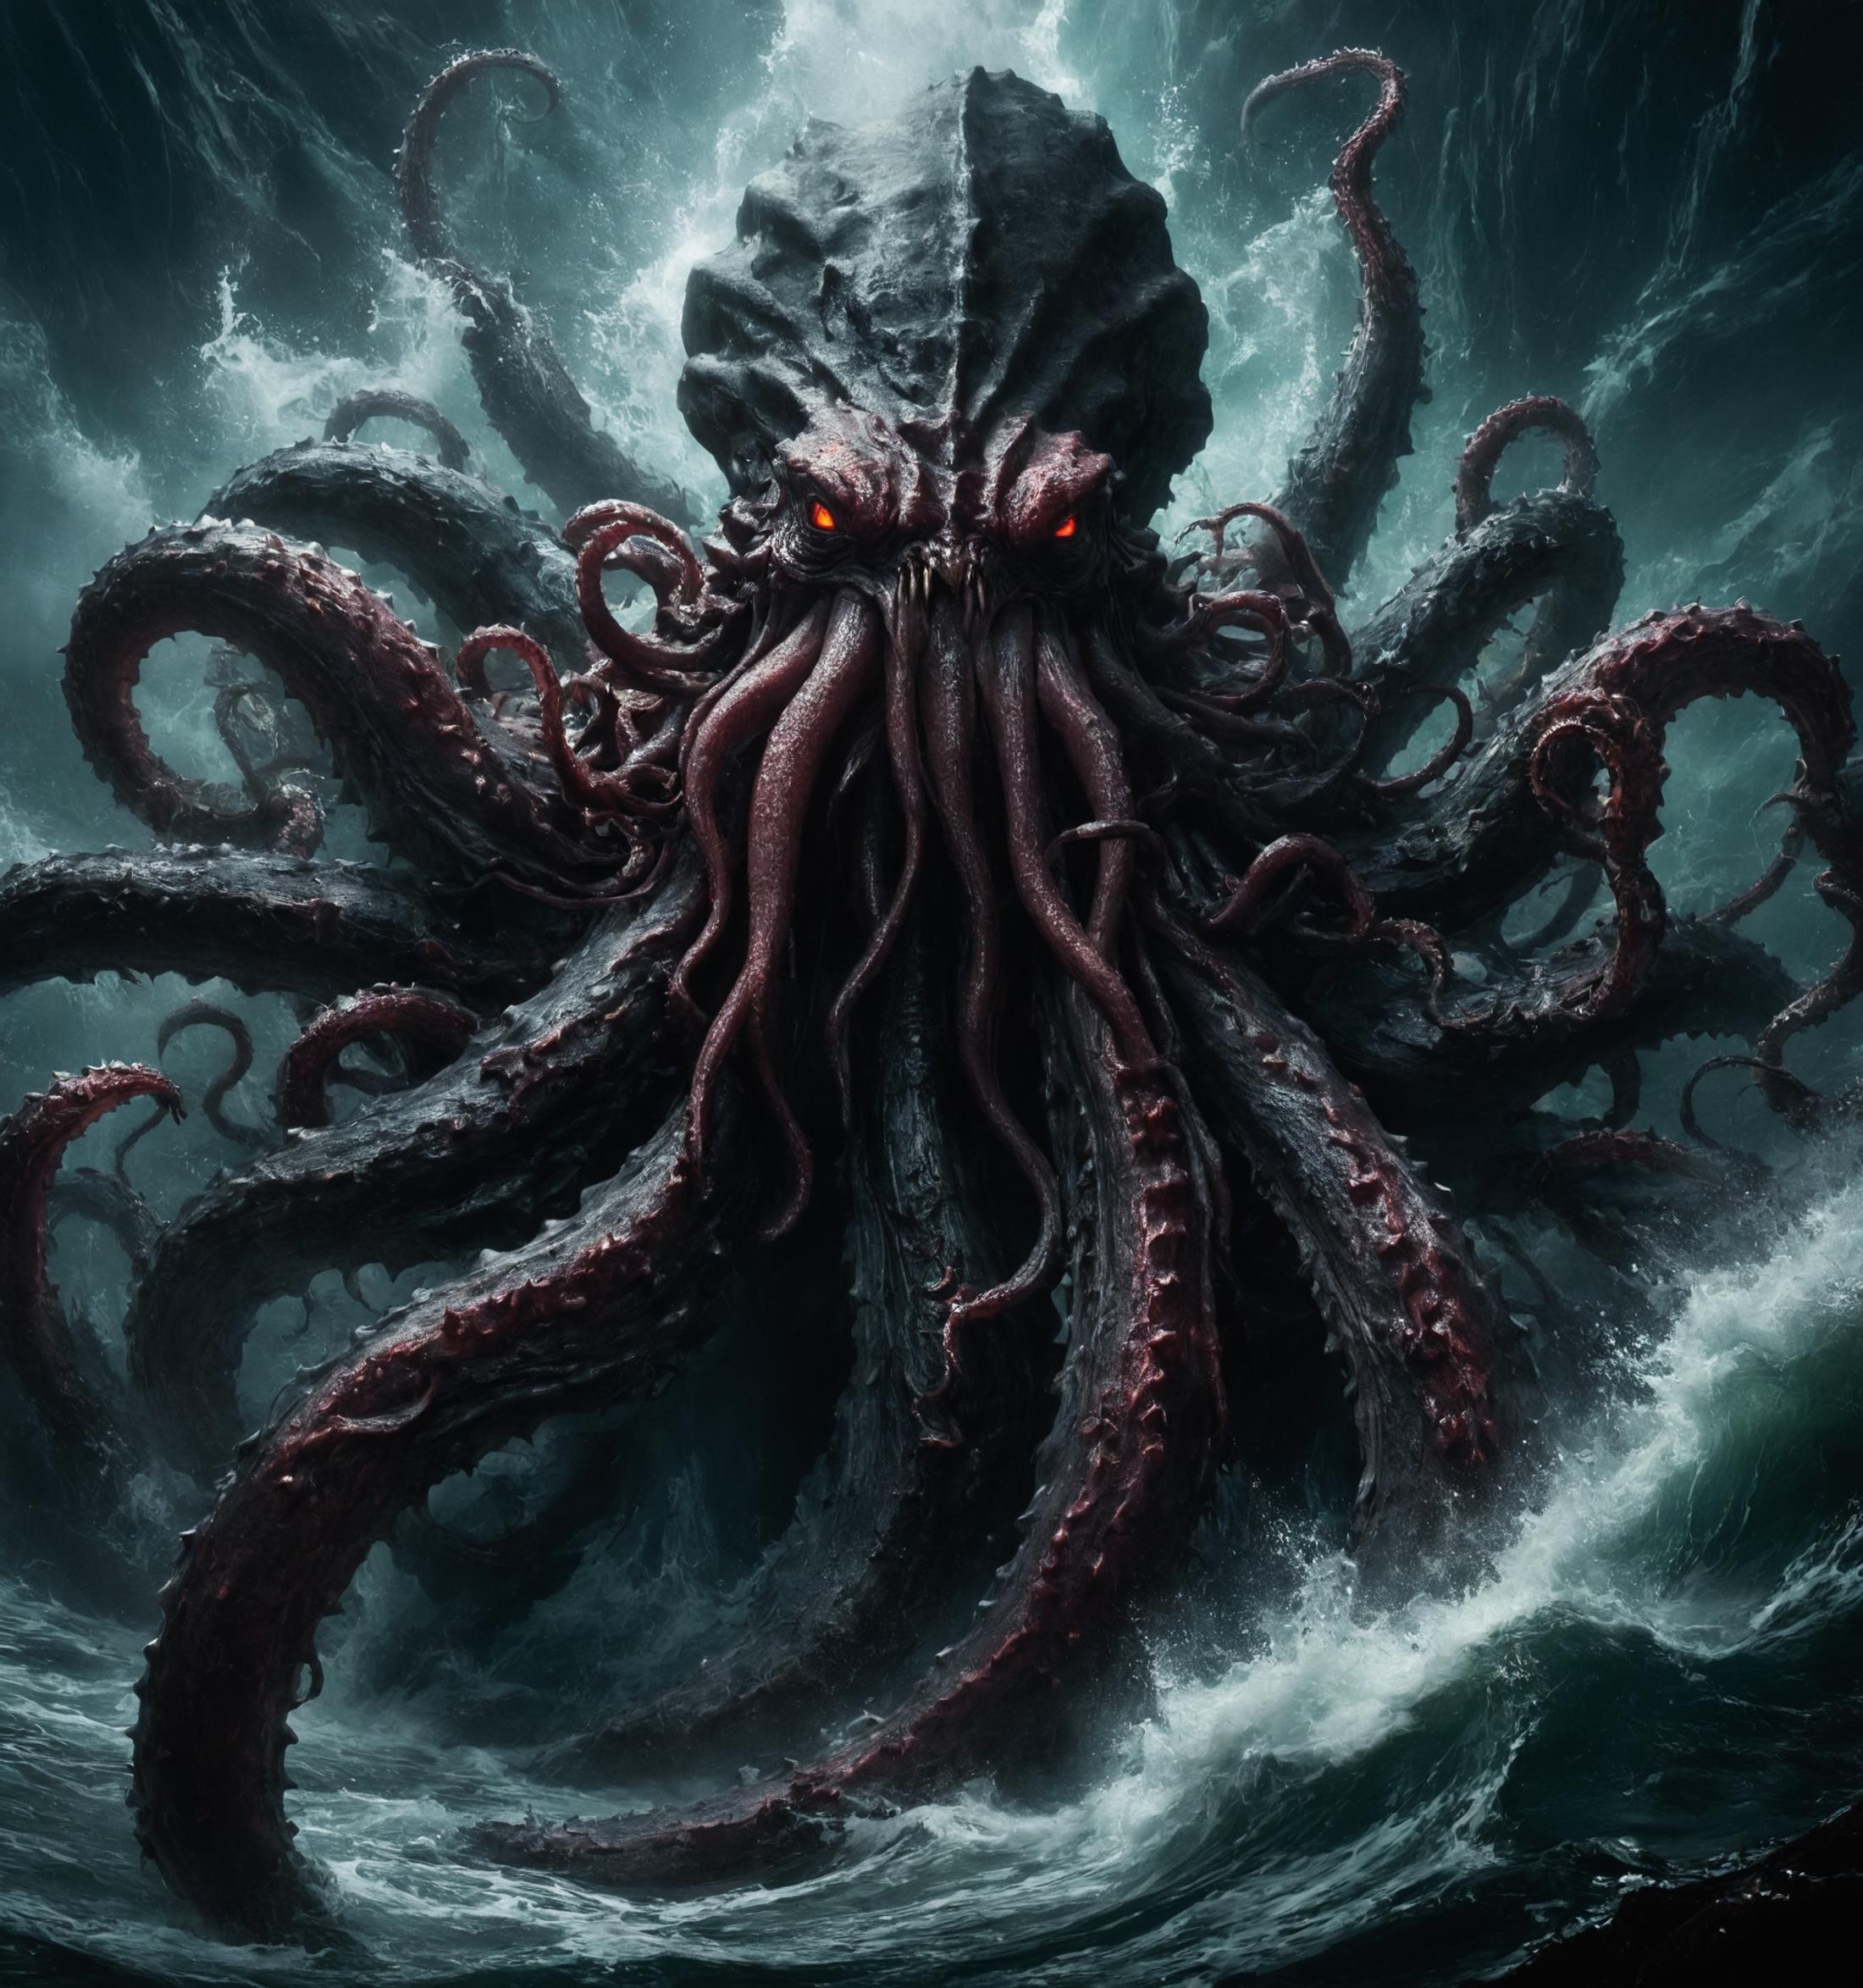 A giant sea monster with red eyes and many tentacles, surrounded by a stormy ocean.